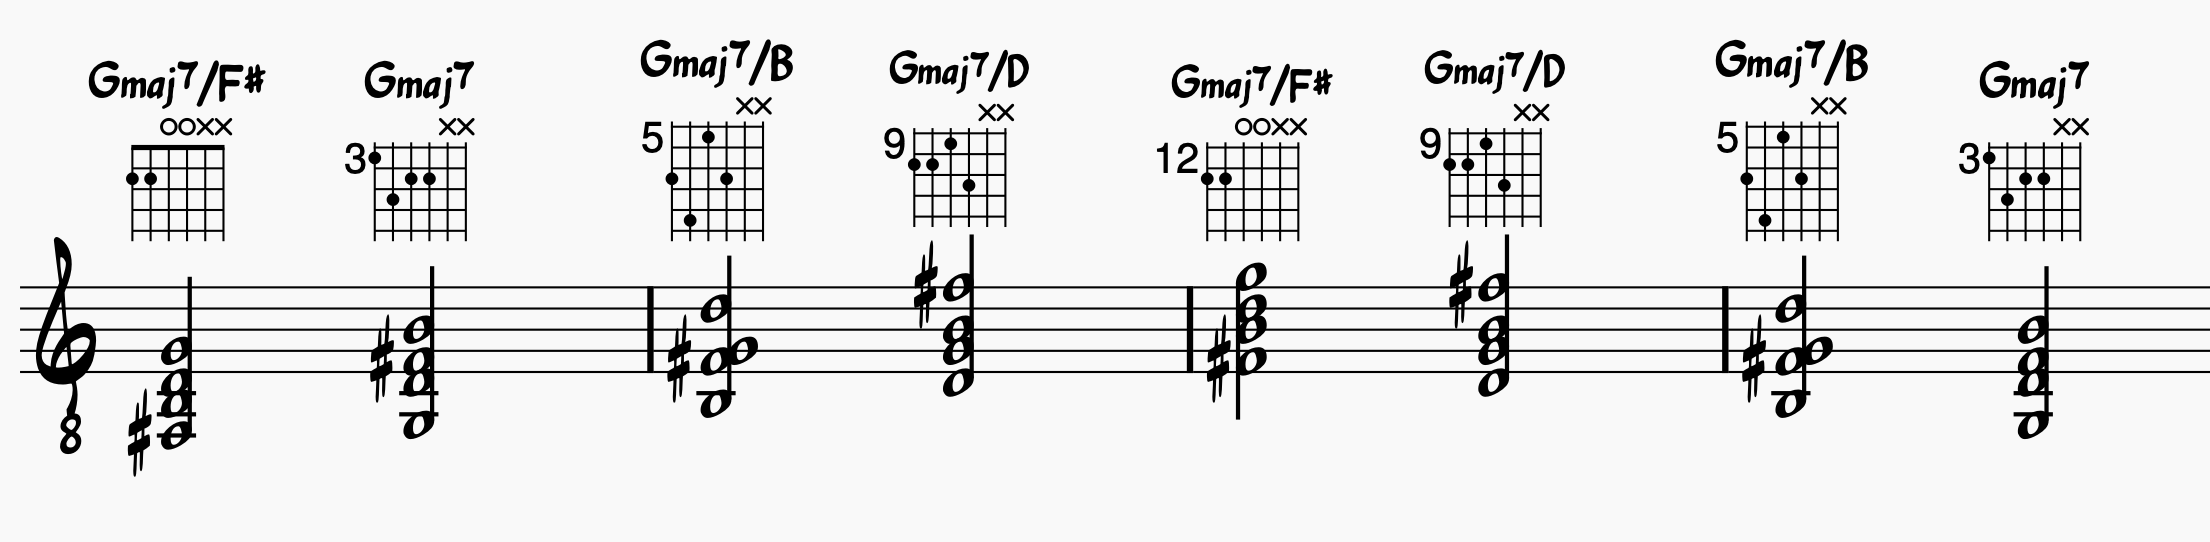 Major chord switching exercises using half notes; 7th chords and inversions